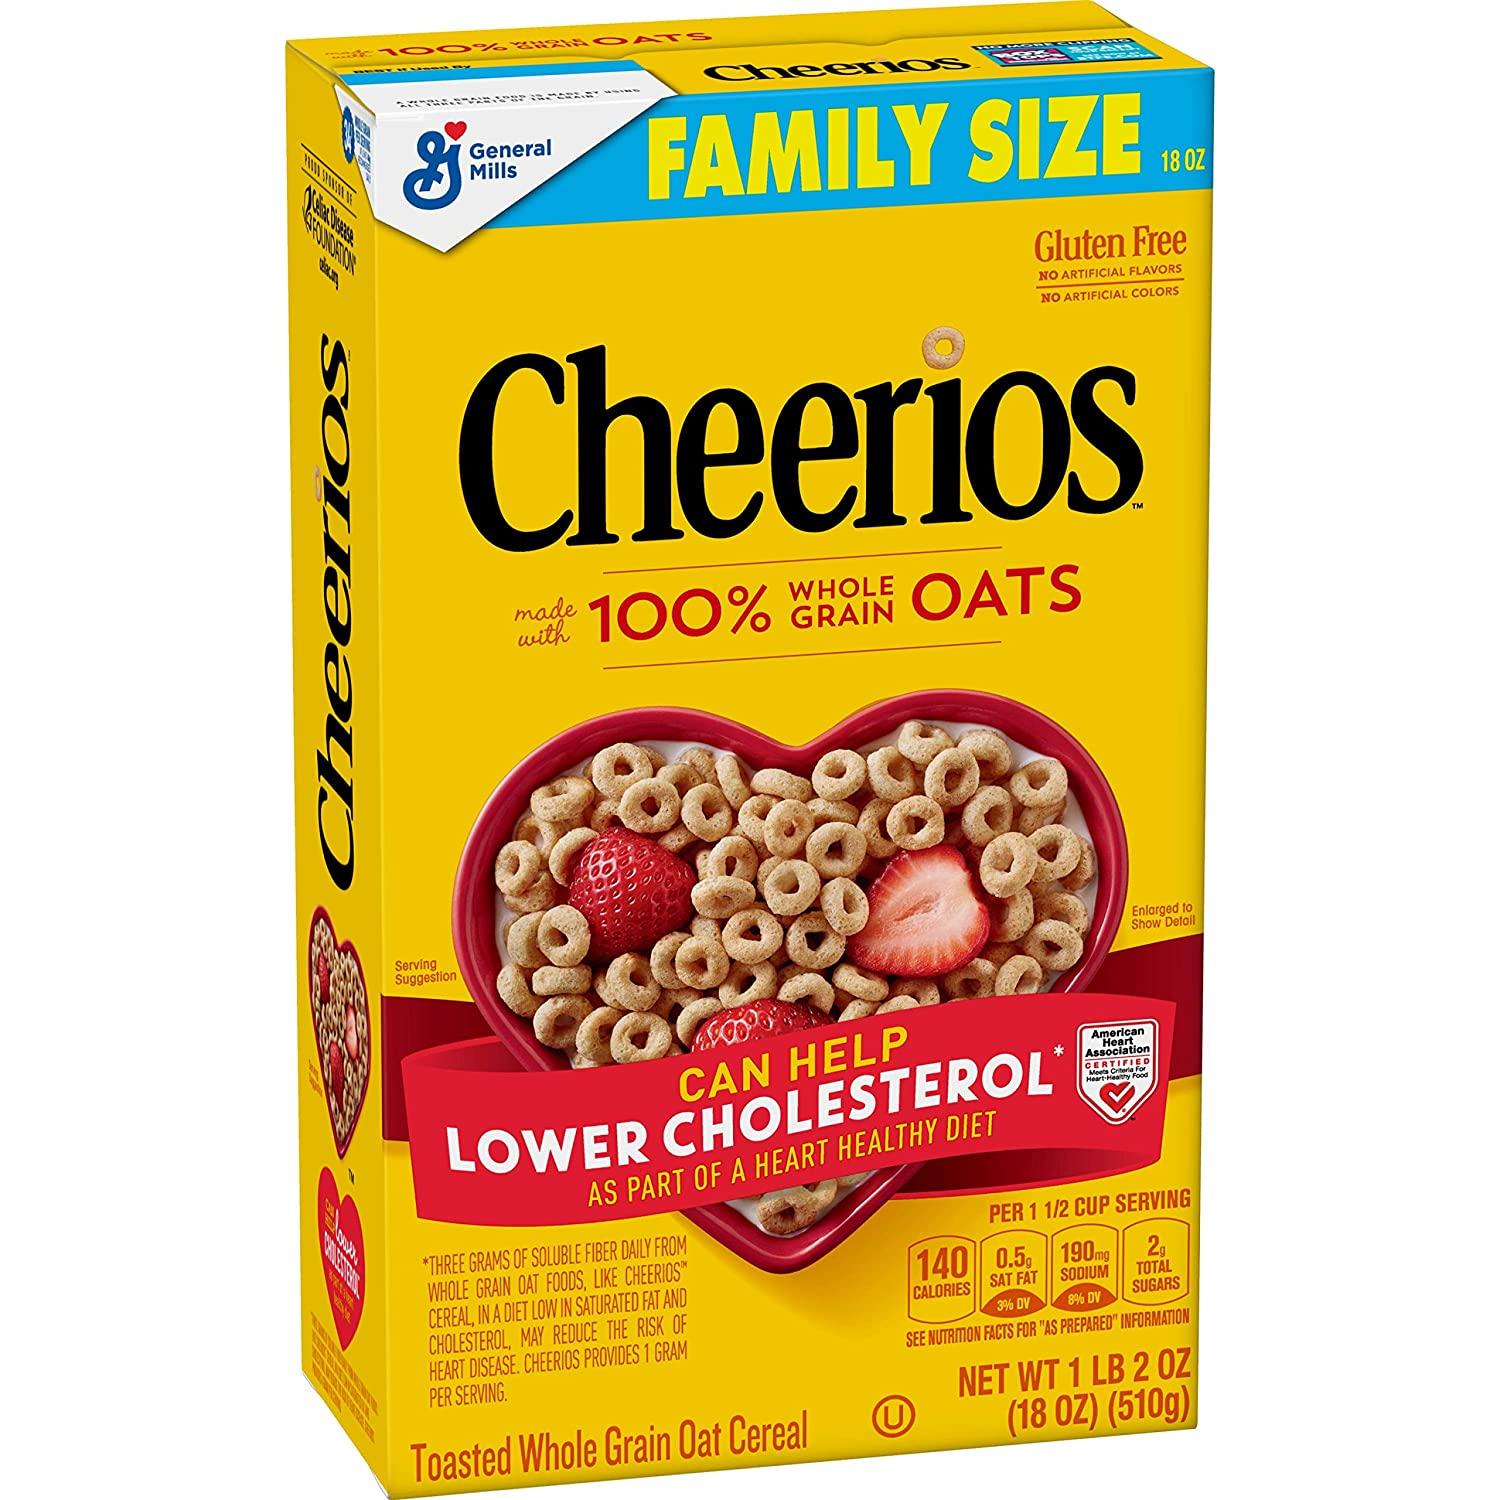 Cheerios Toasted Whole Grain Oat Cereal for $2.98 Shipped